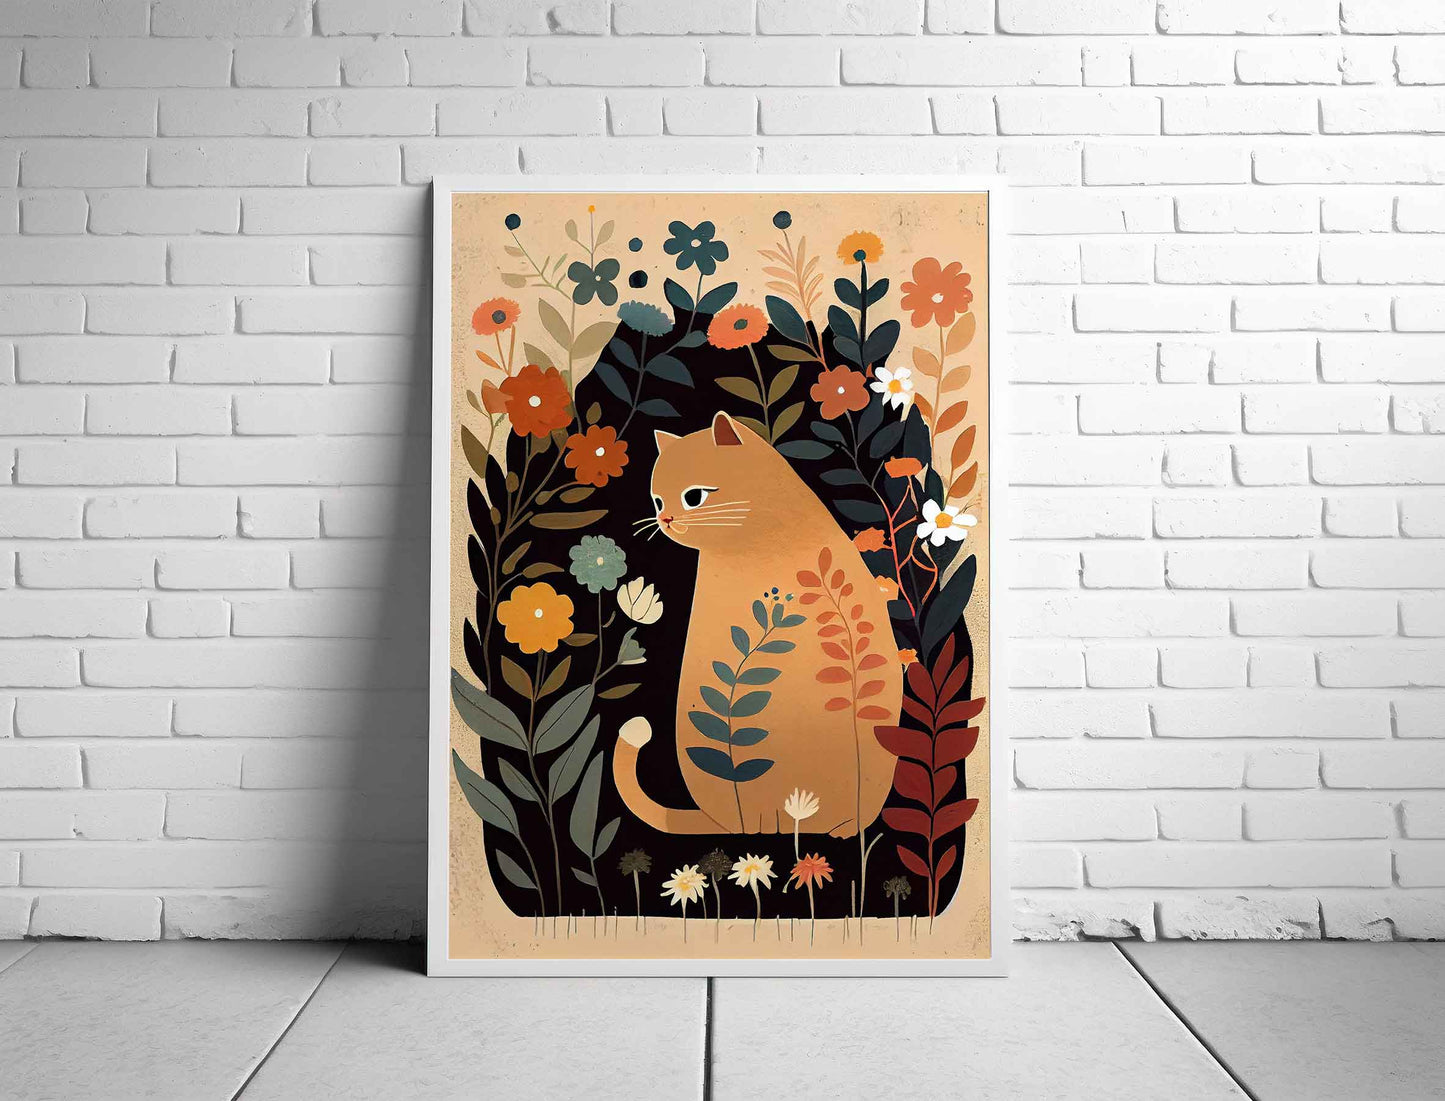 Framed Image of Cute Beige Brown Cat With Flowers Wall Art Poster Print